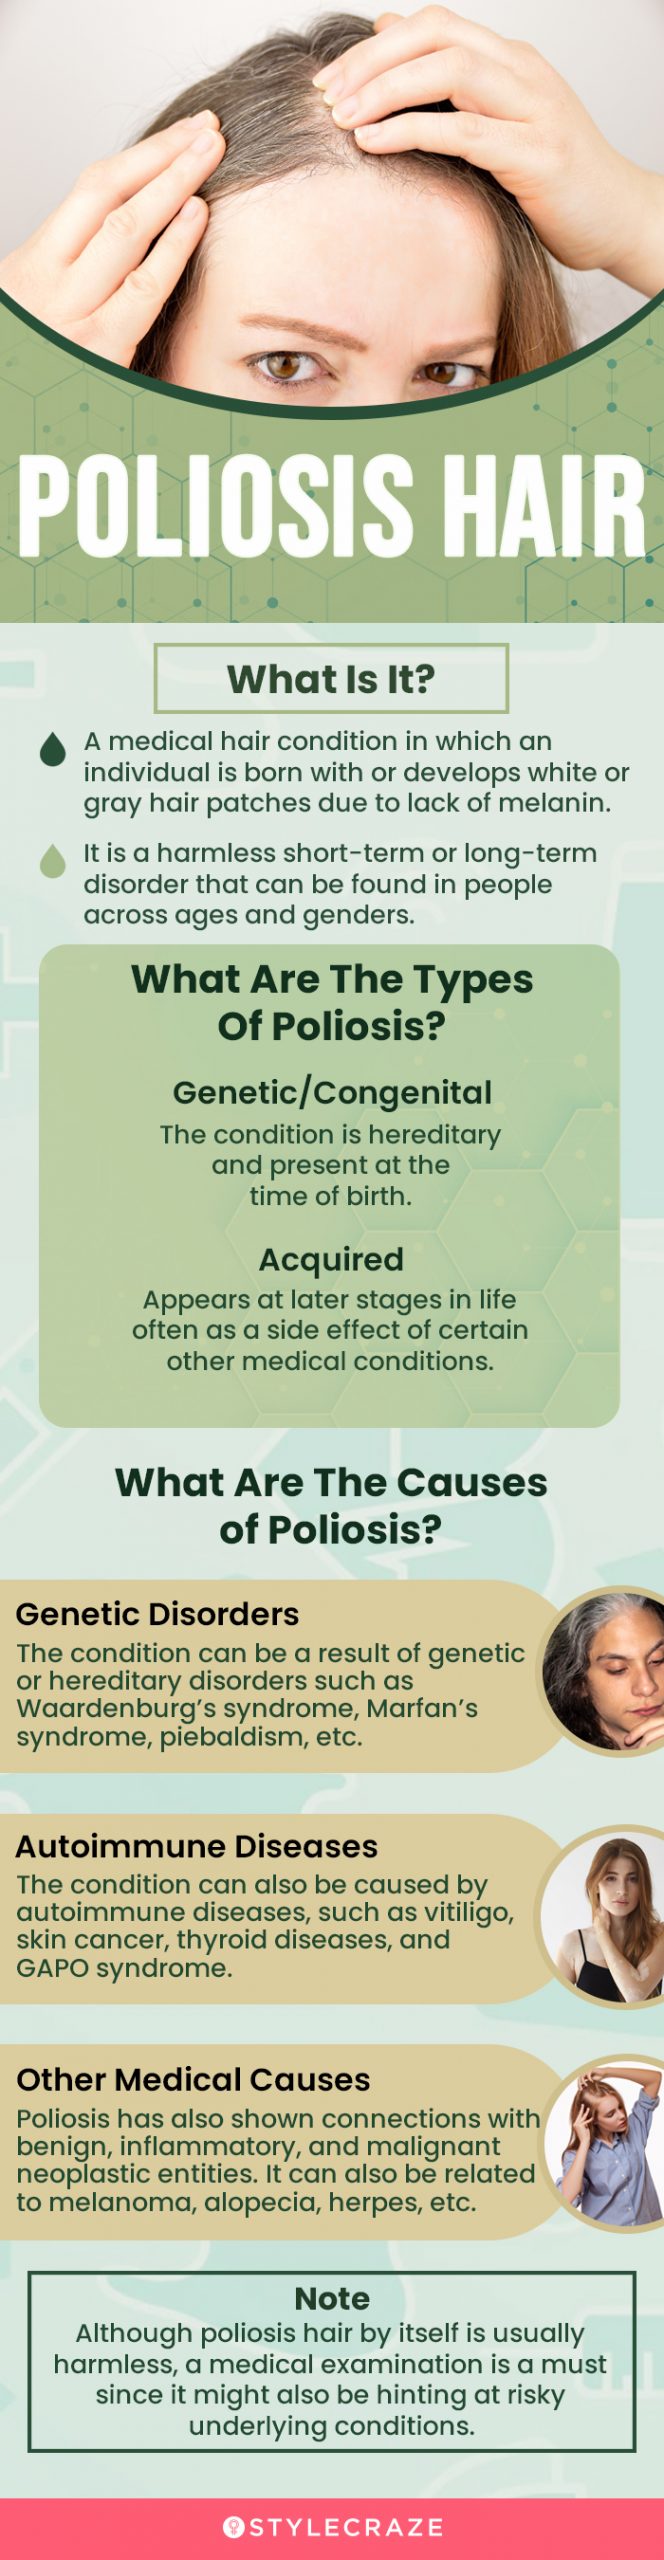 poliosis hair (infographic)